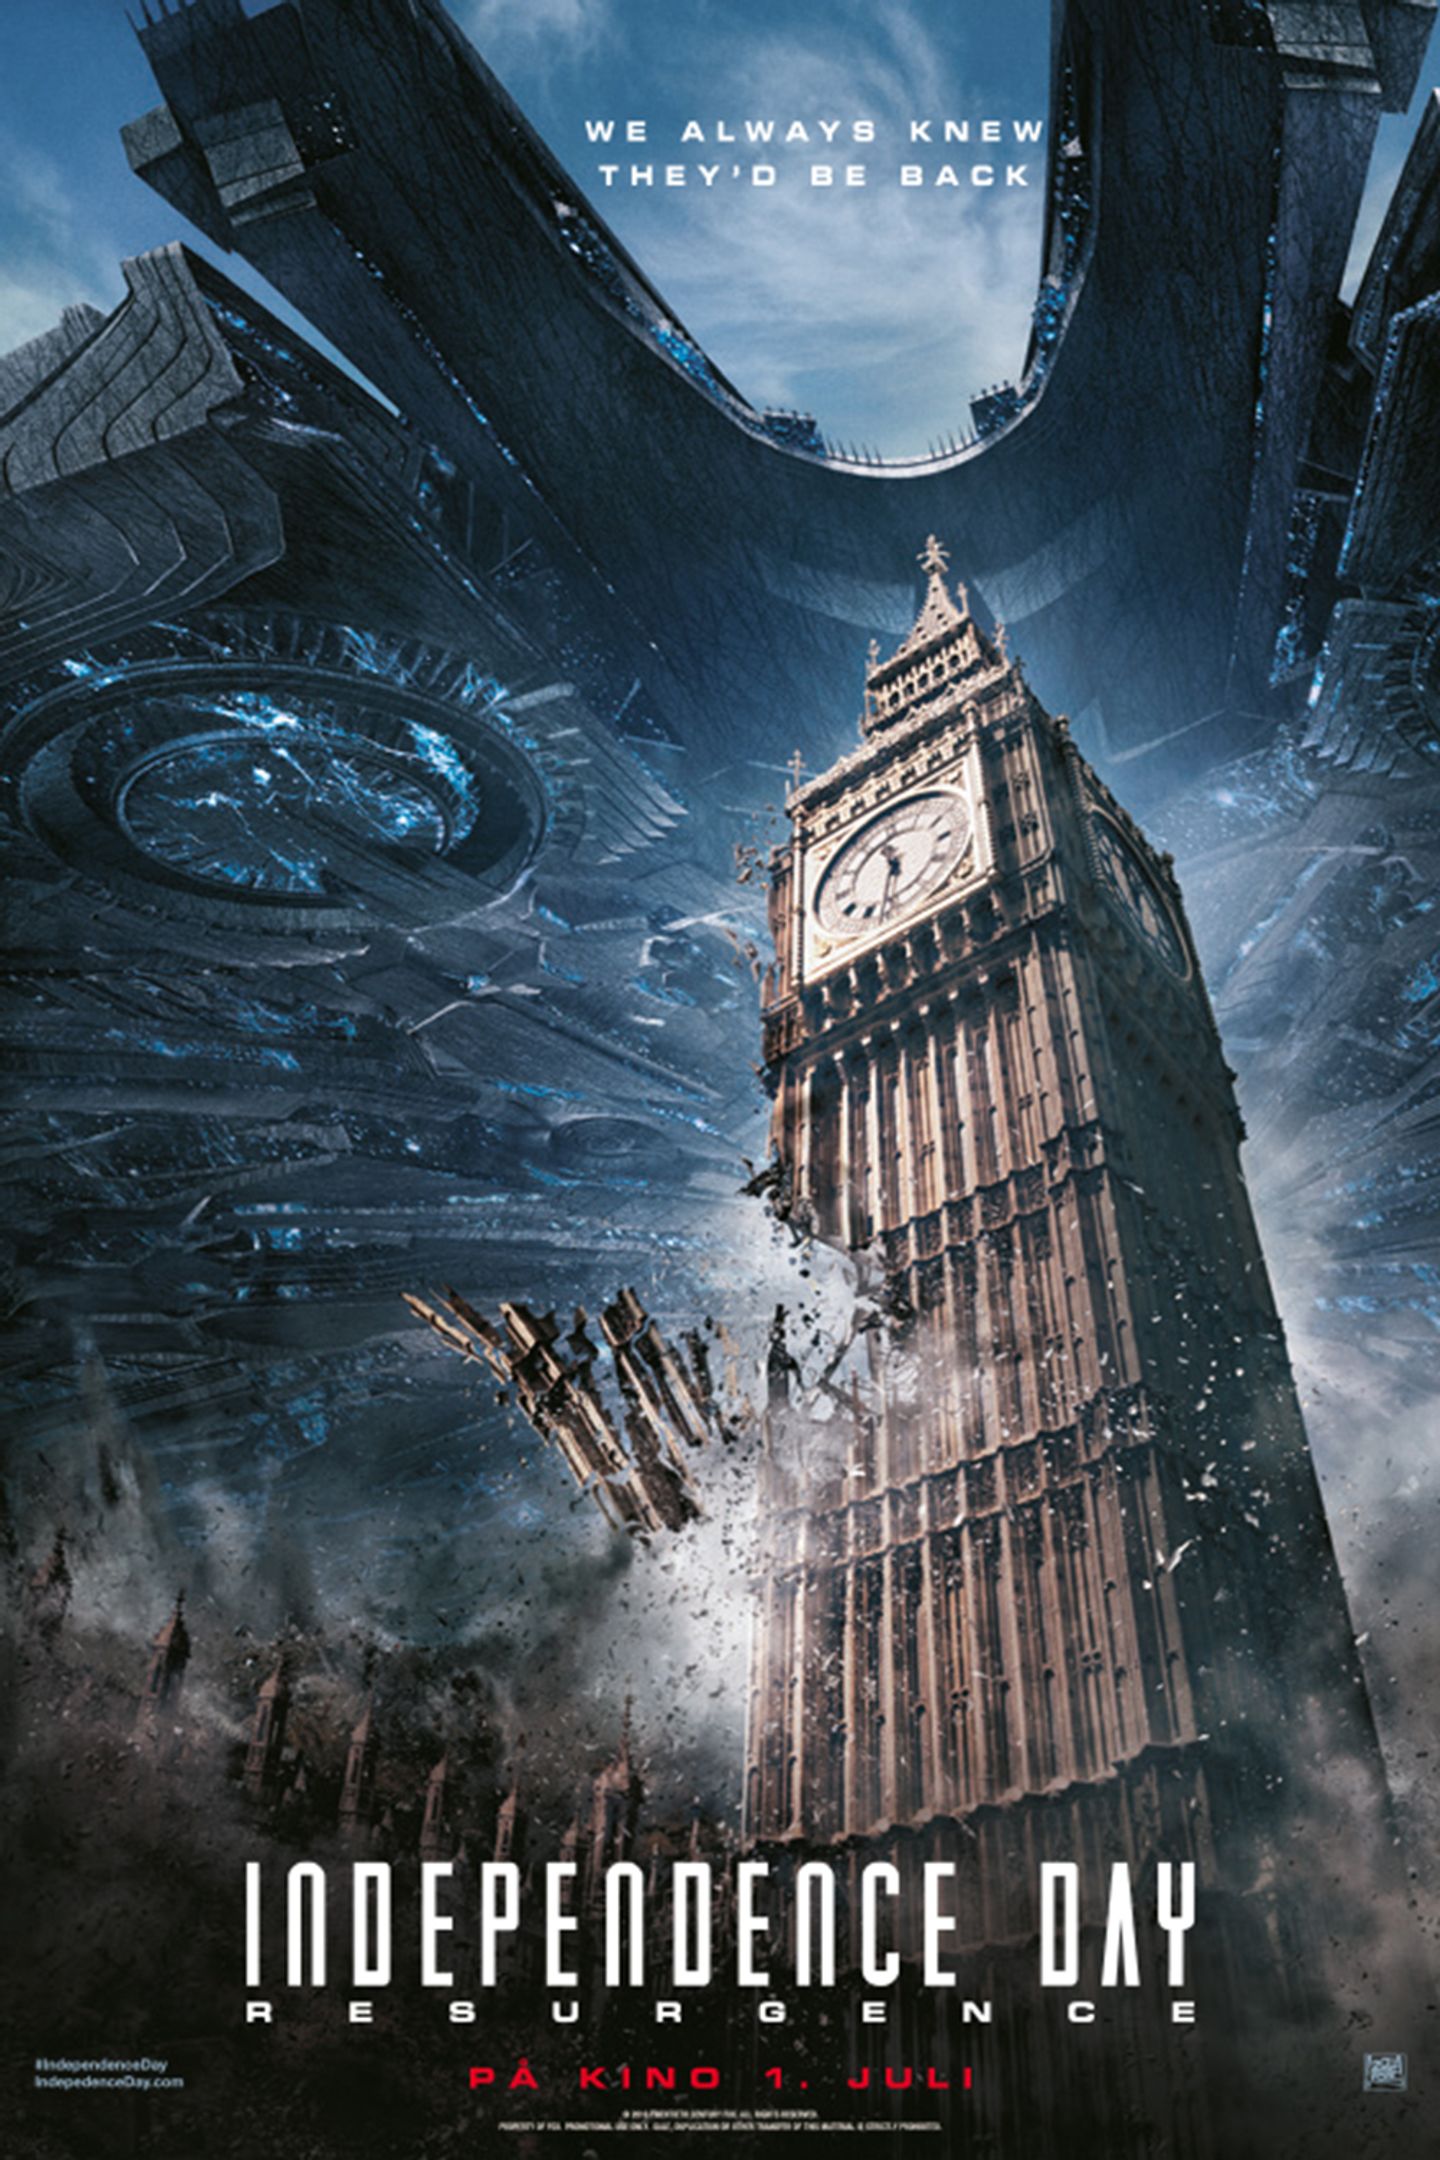 Plakat for 'Independence Day: Resurgence (3D)'